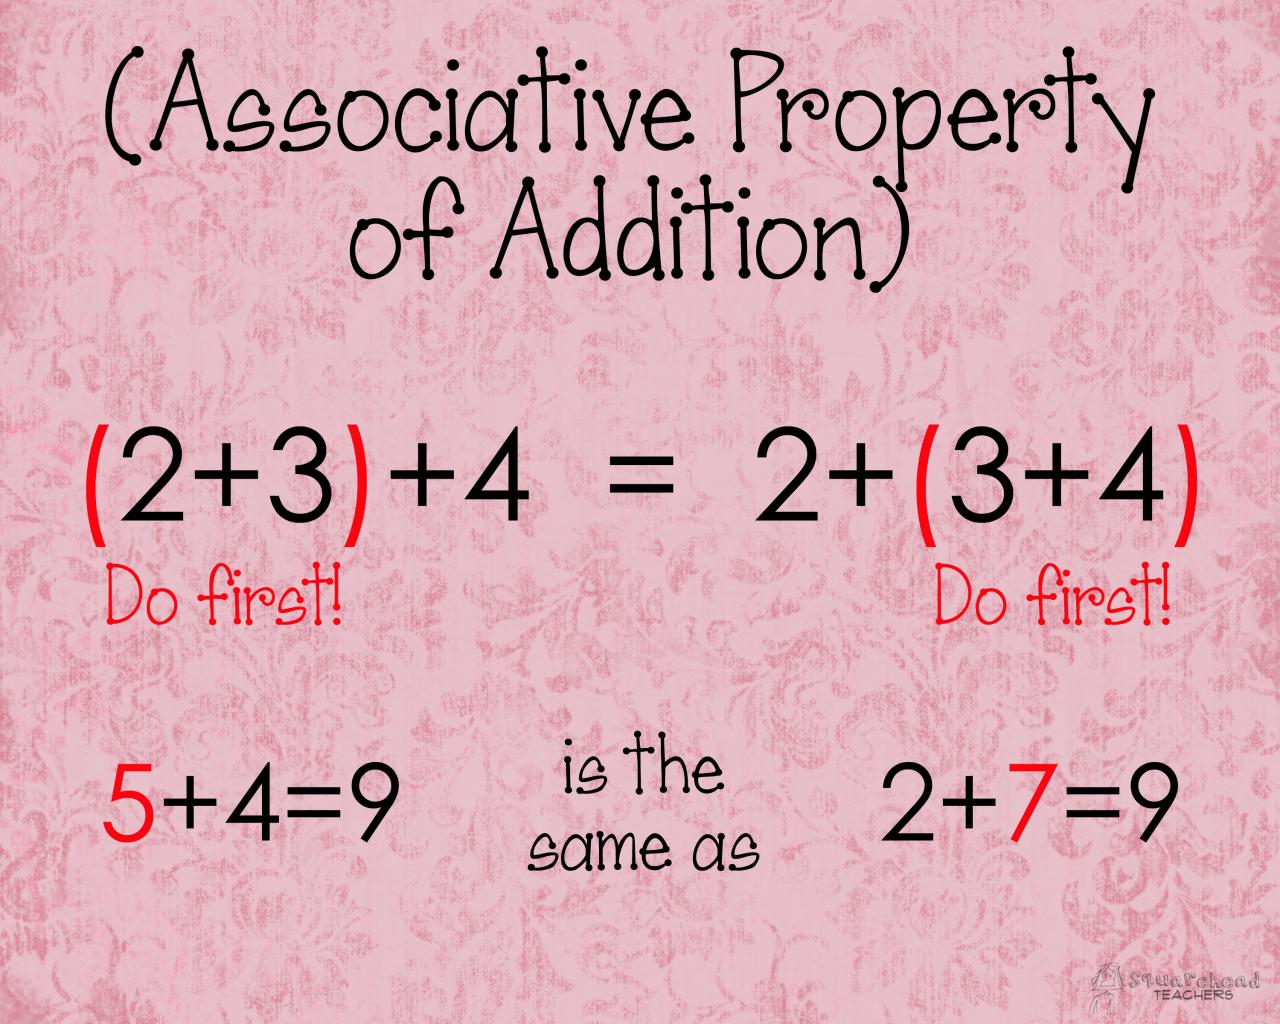 Associative law of addition to write an equivalent expression